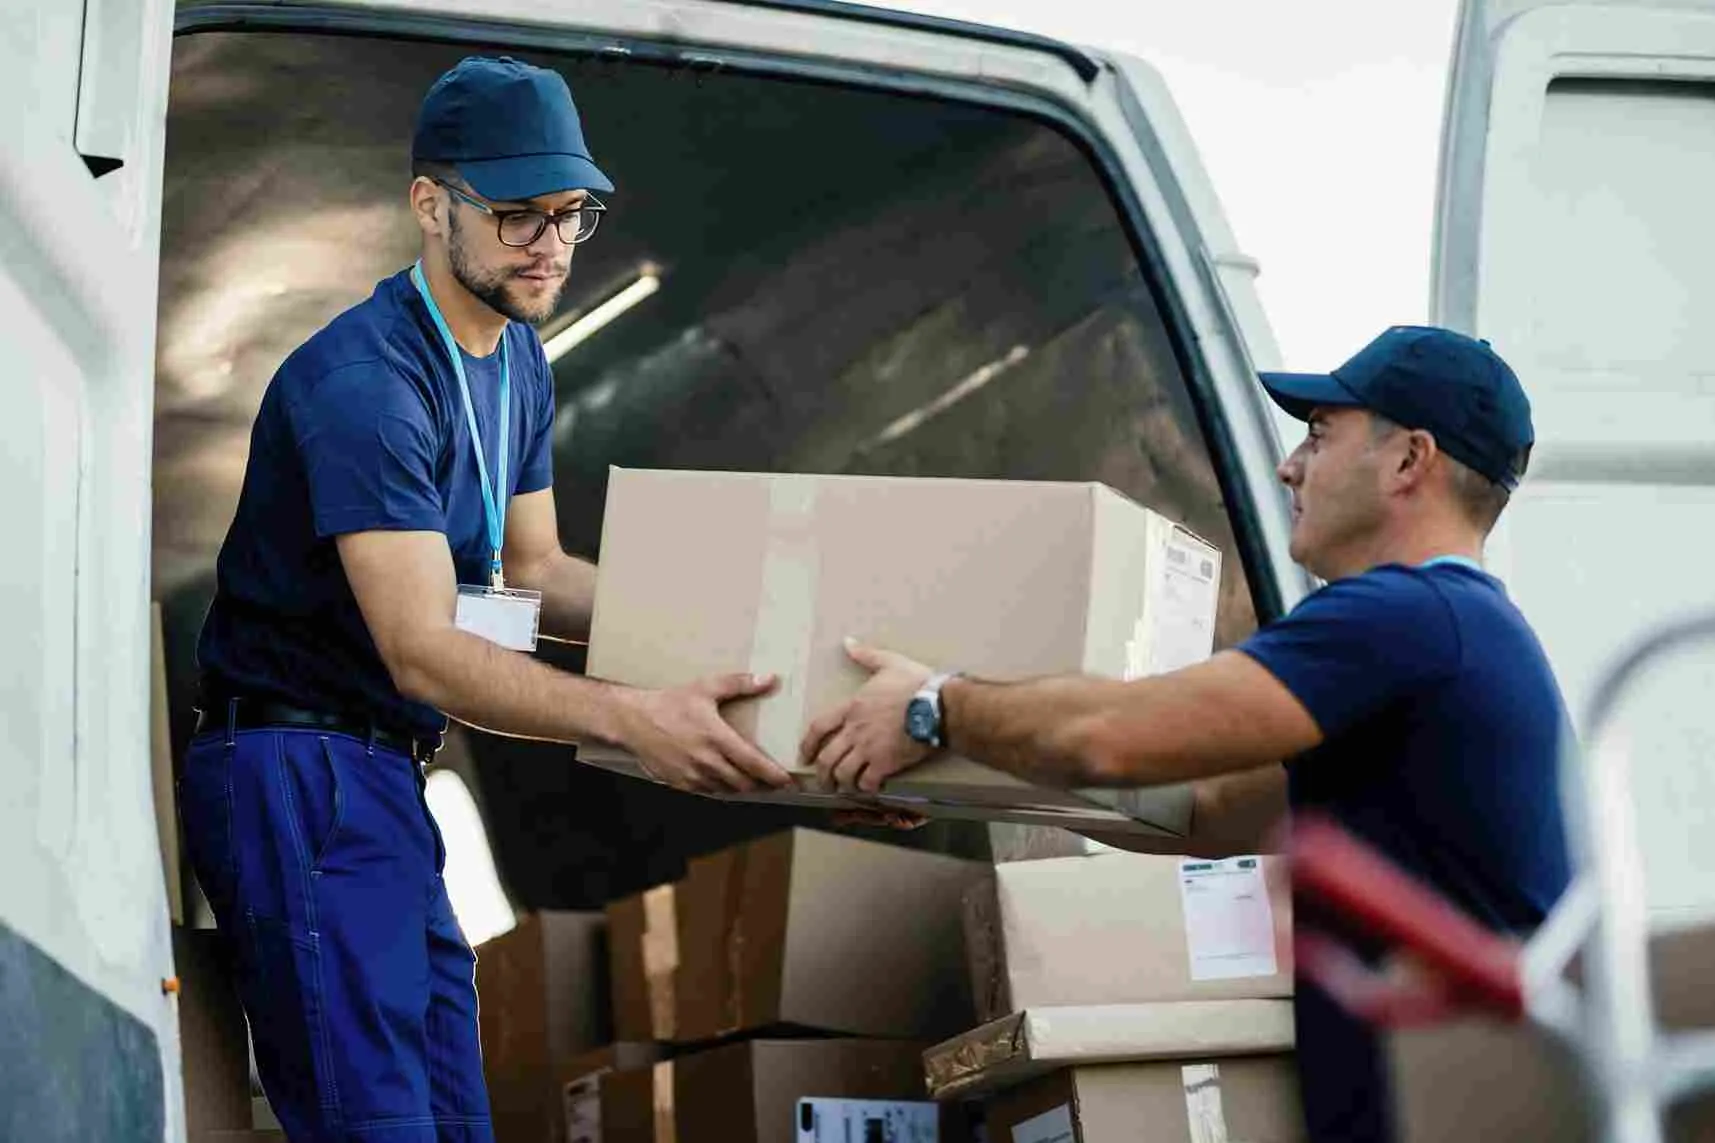 We have experts in house movers in ajman,so that we can easily shift your home with quick services.Best movers and packers ajman